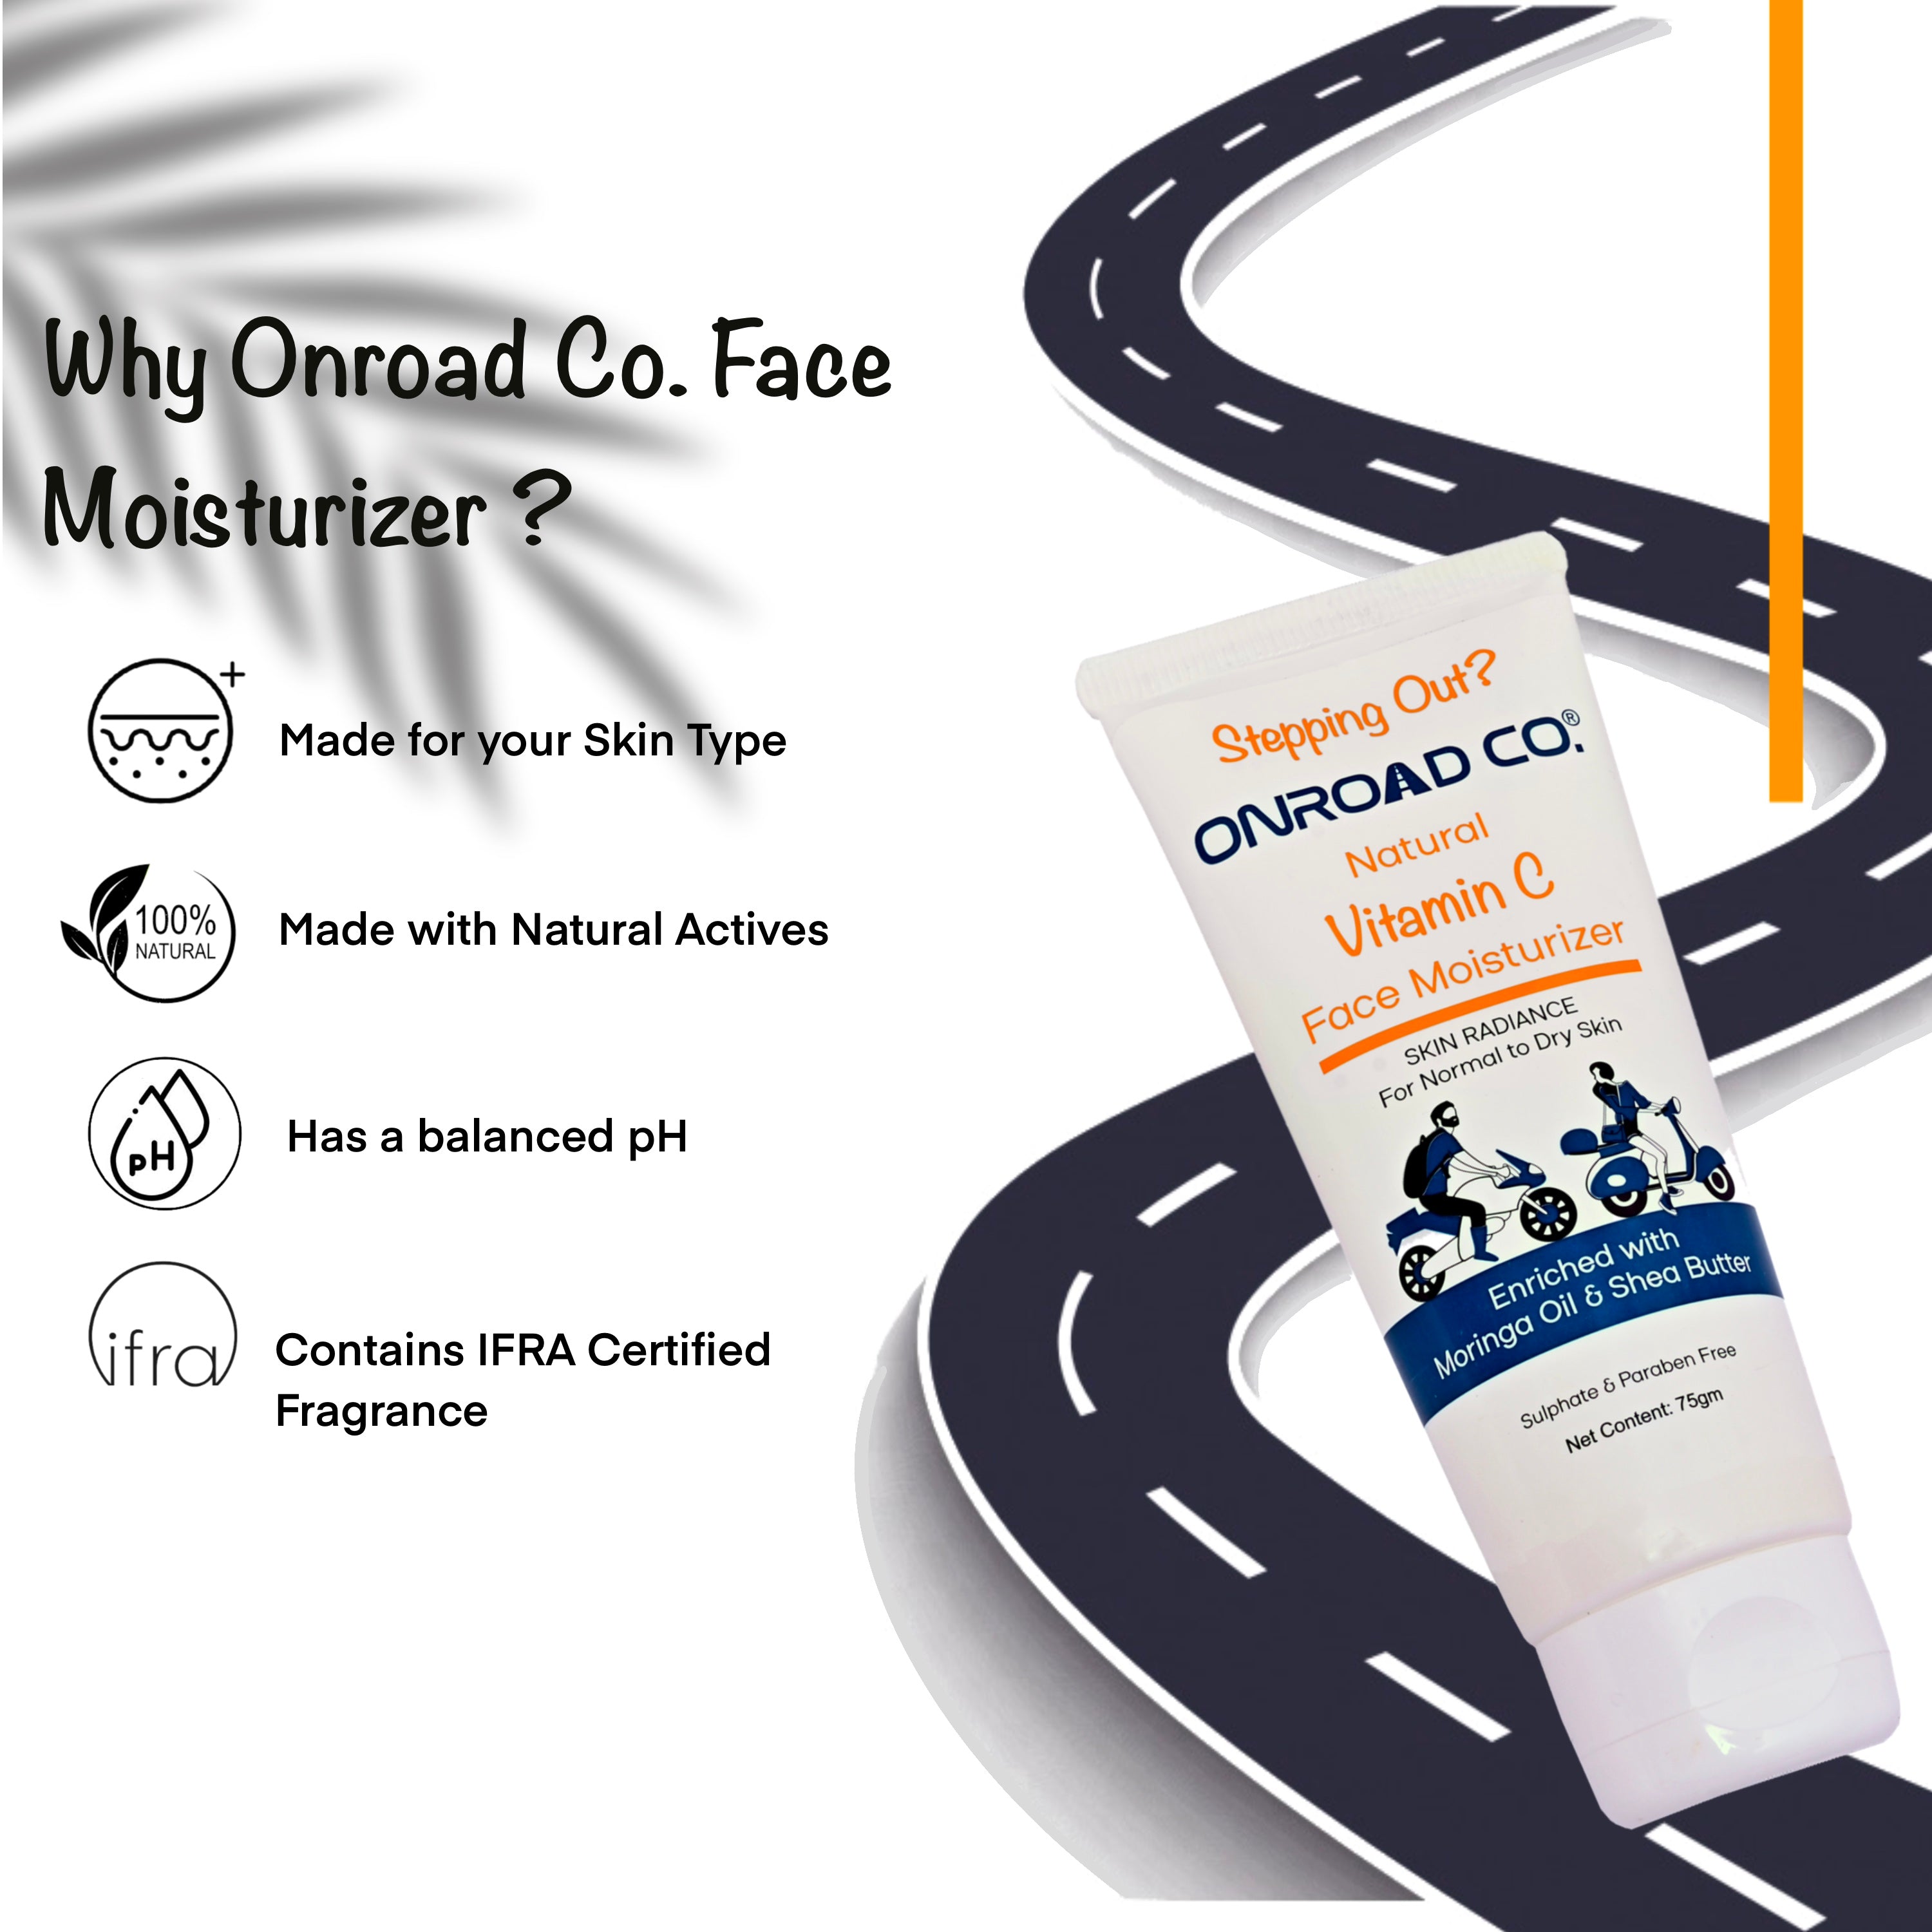 Vitamin C Face Moisturizer | Especially for Normal to Dry Skin | Enriched with Moringa Oil and Shea Butter | No Sulphates & Parabens | 100% Toxin Free